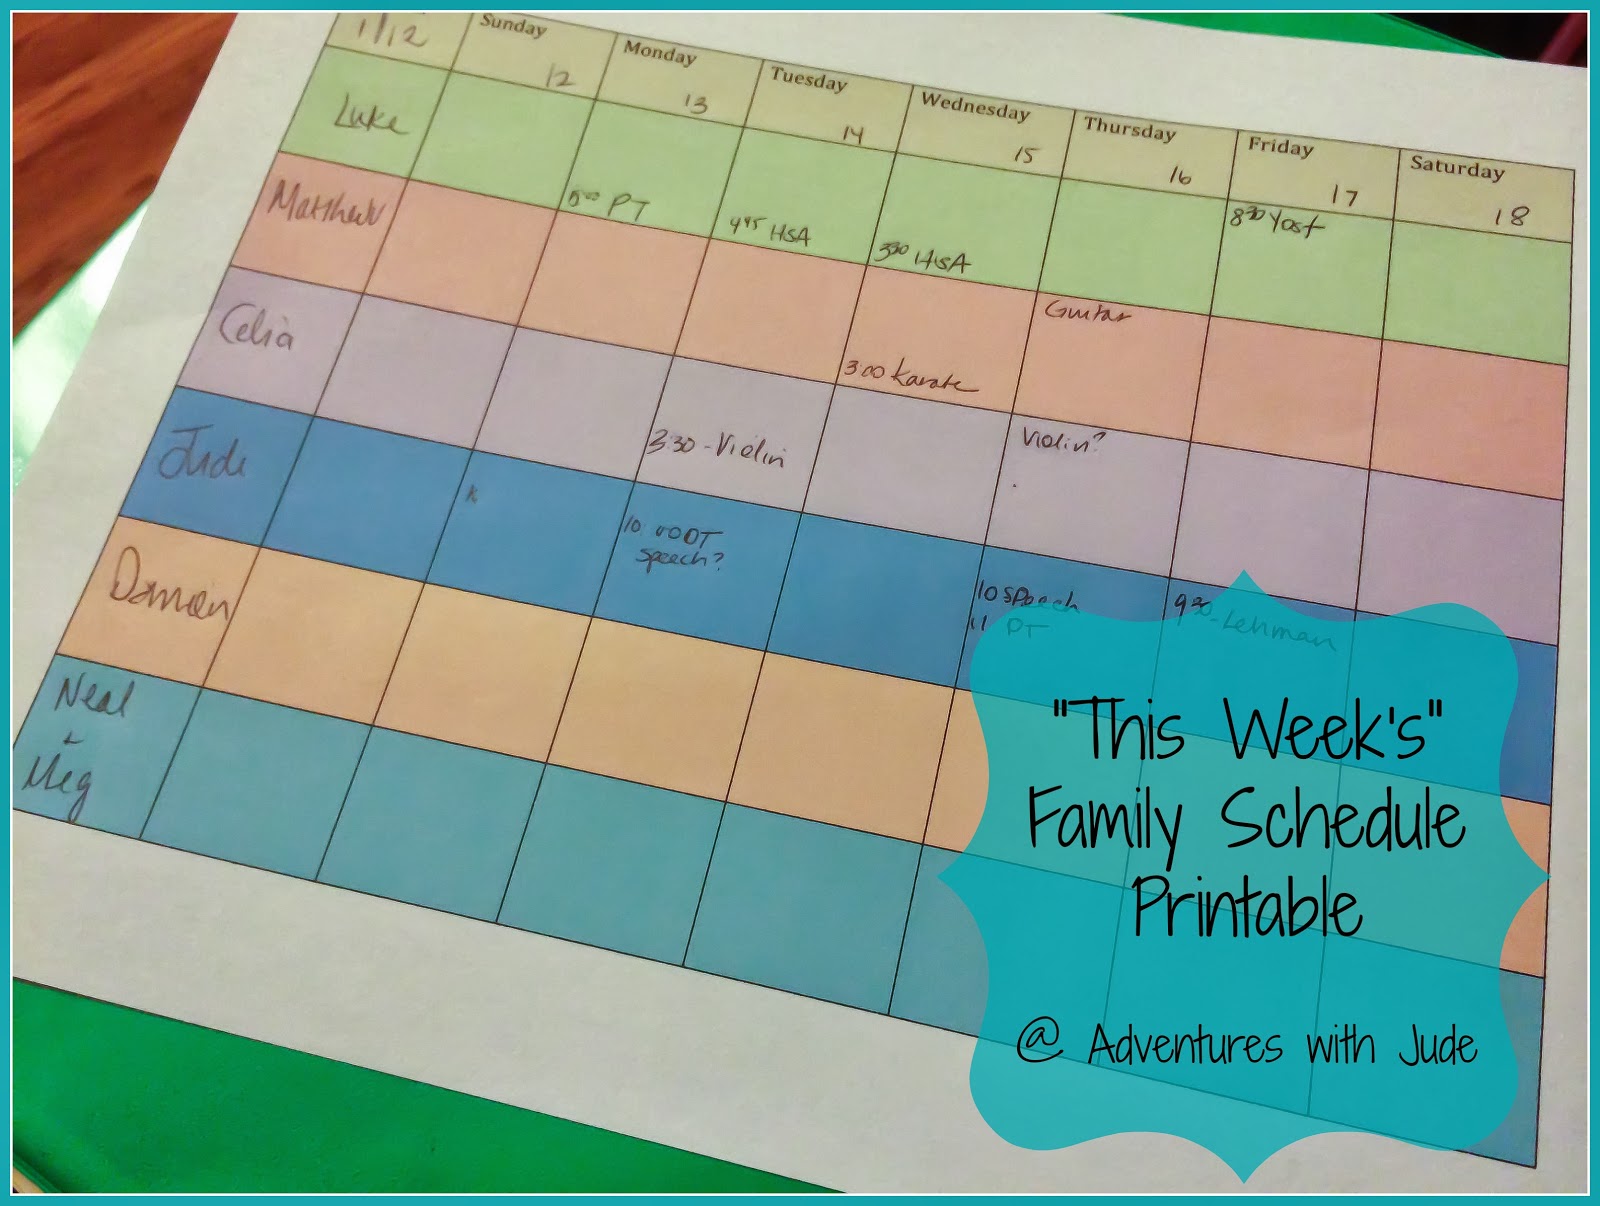 Free family schedule printable from Adventures with Jude